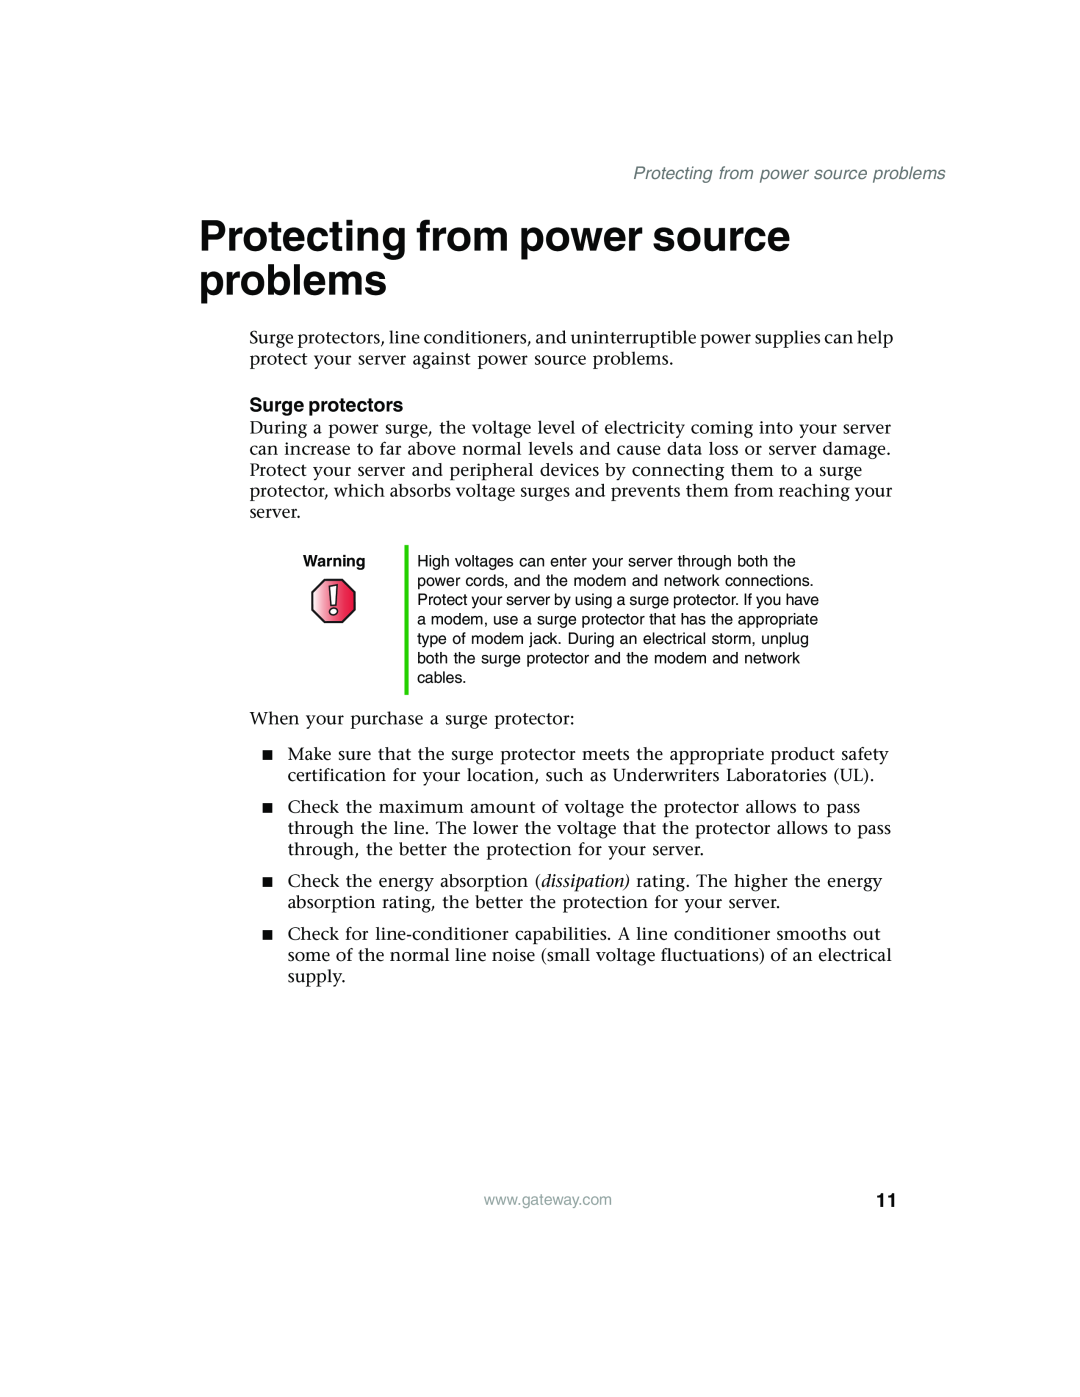 Gateway 980 manual Protecting from power source problems, Surge protectors 